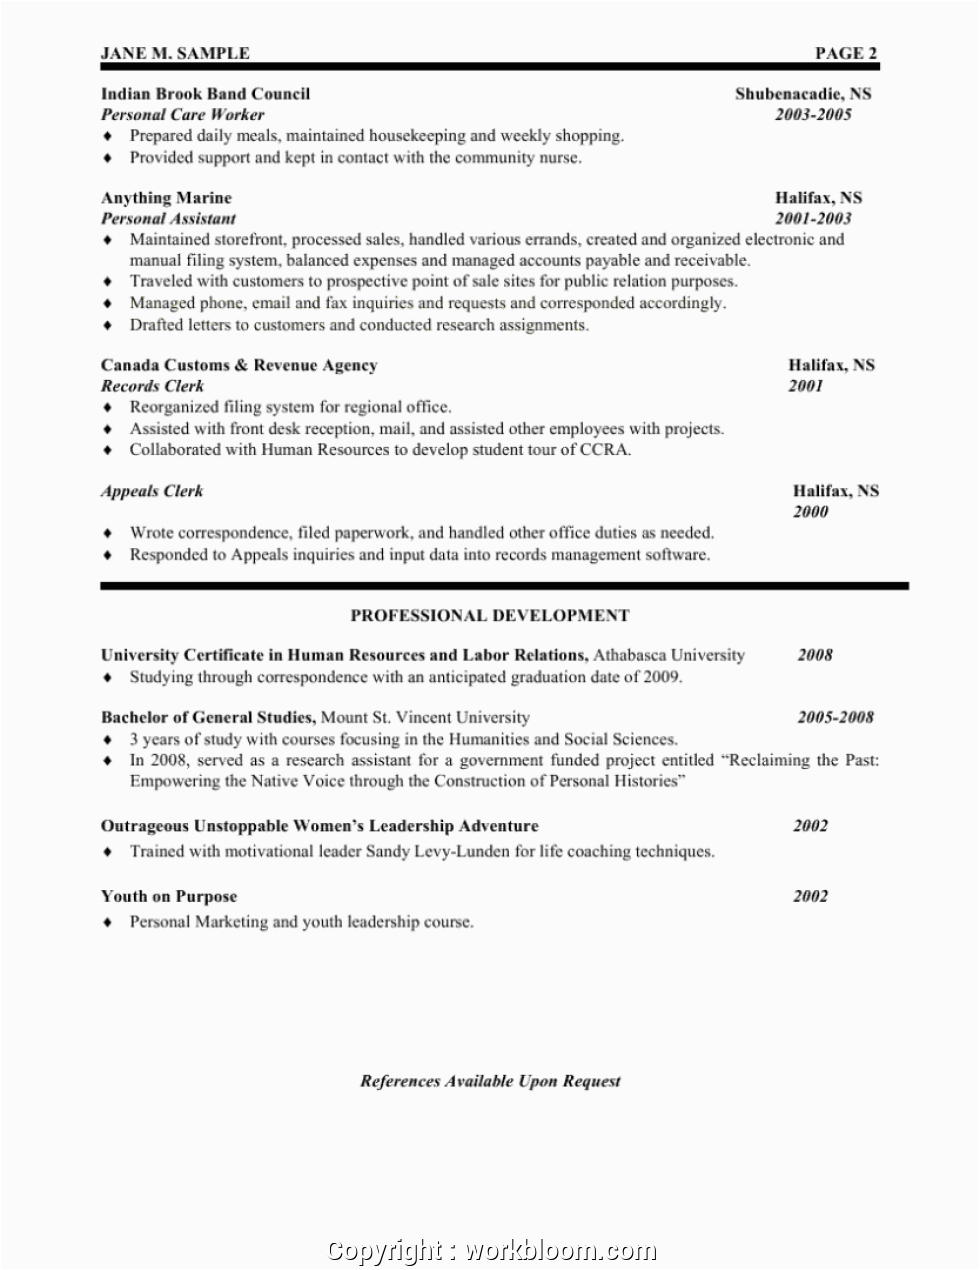 Human Resources Administrative assistant Resume Sample top Human Resources assistant Resume Sample Human